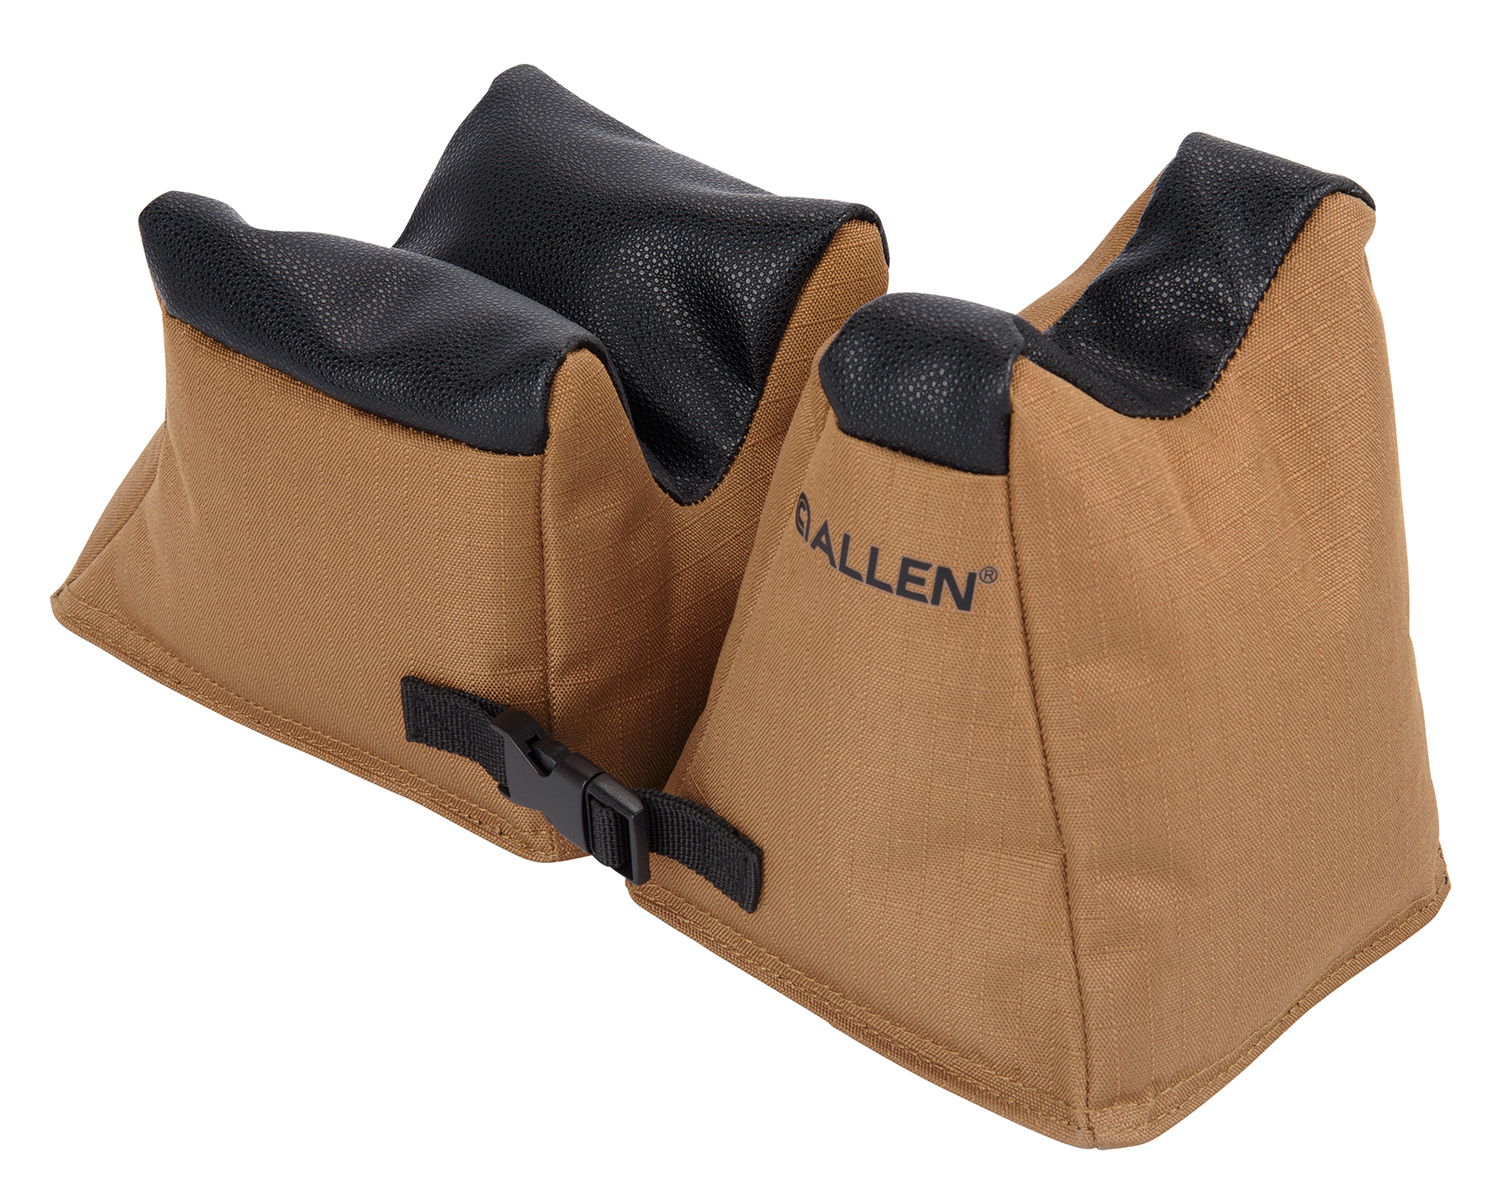 Allen 18411 X-Focus Shooting Rest Combo Prefilled Front and Rear Bag made of Coyote with Black Accents  Polyester, weighs 5.10 lbs, 11.50